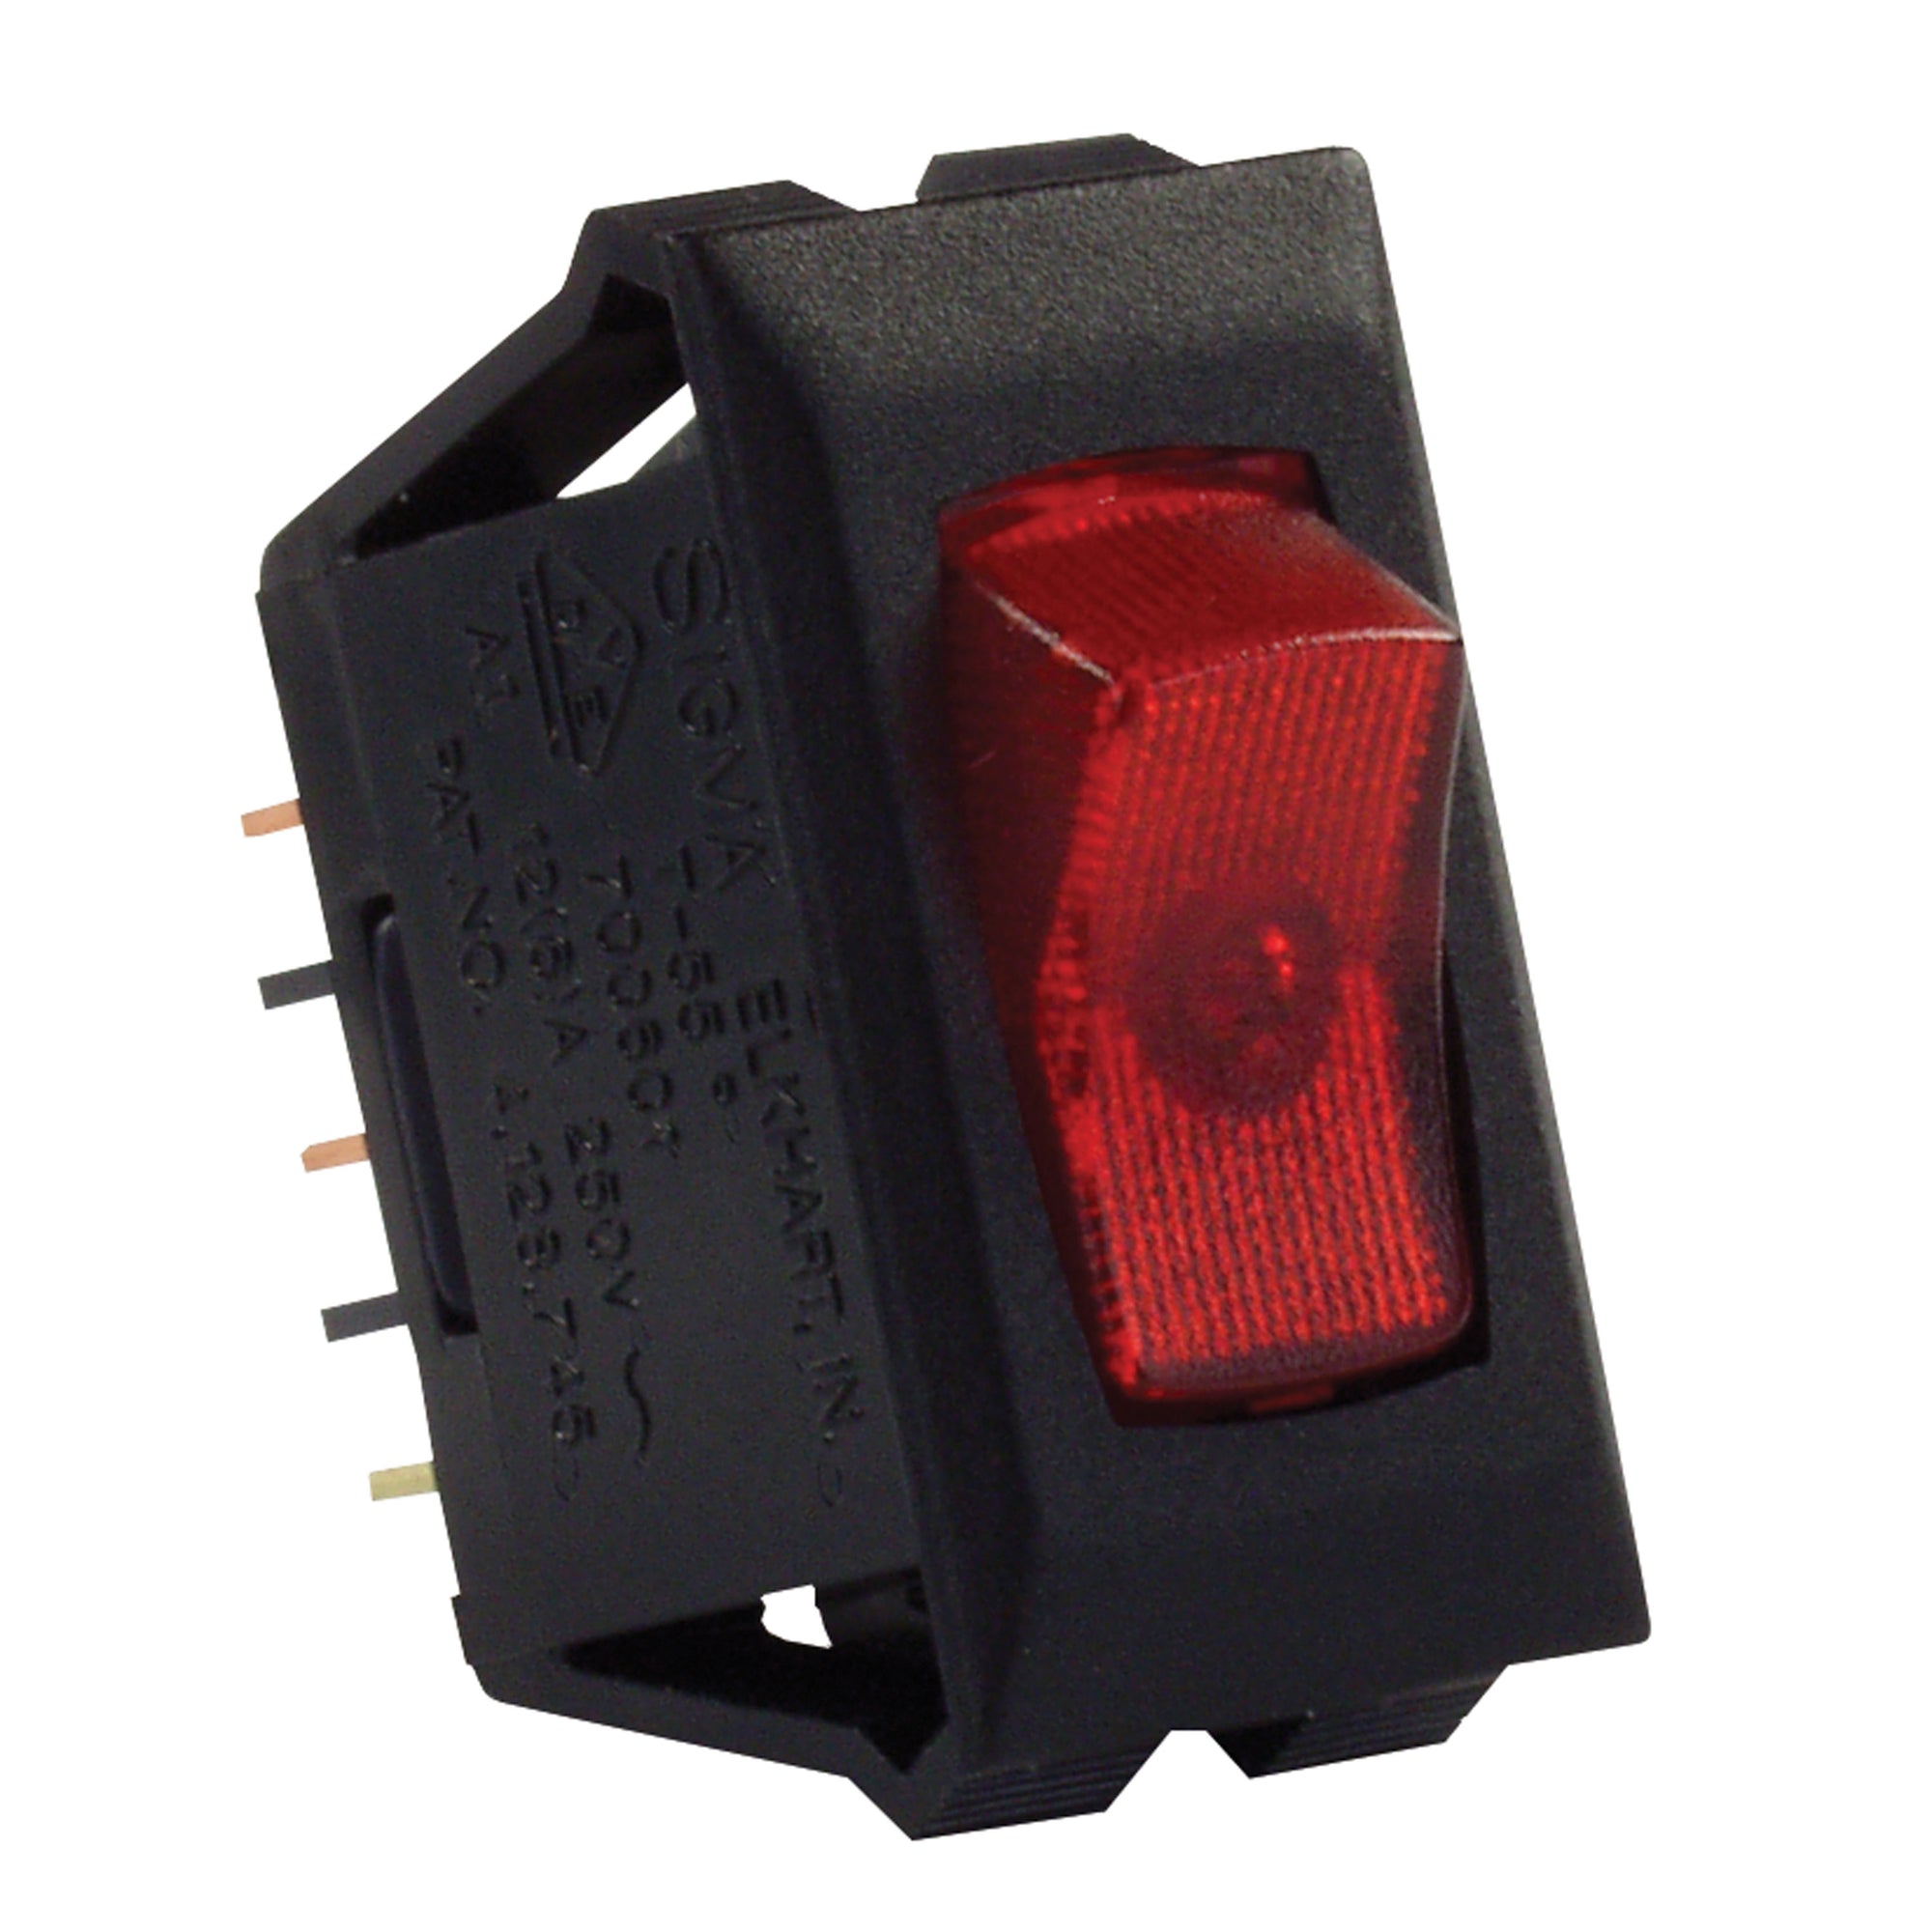 JR Products 12515 Illuminated 120V On/Off Switch - Red/Black